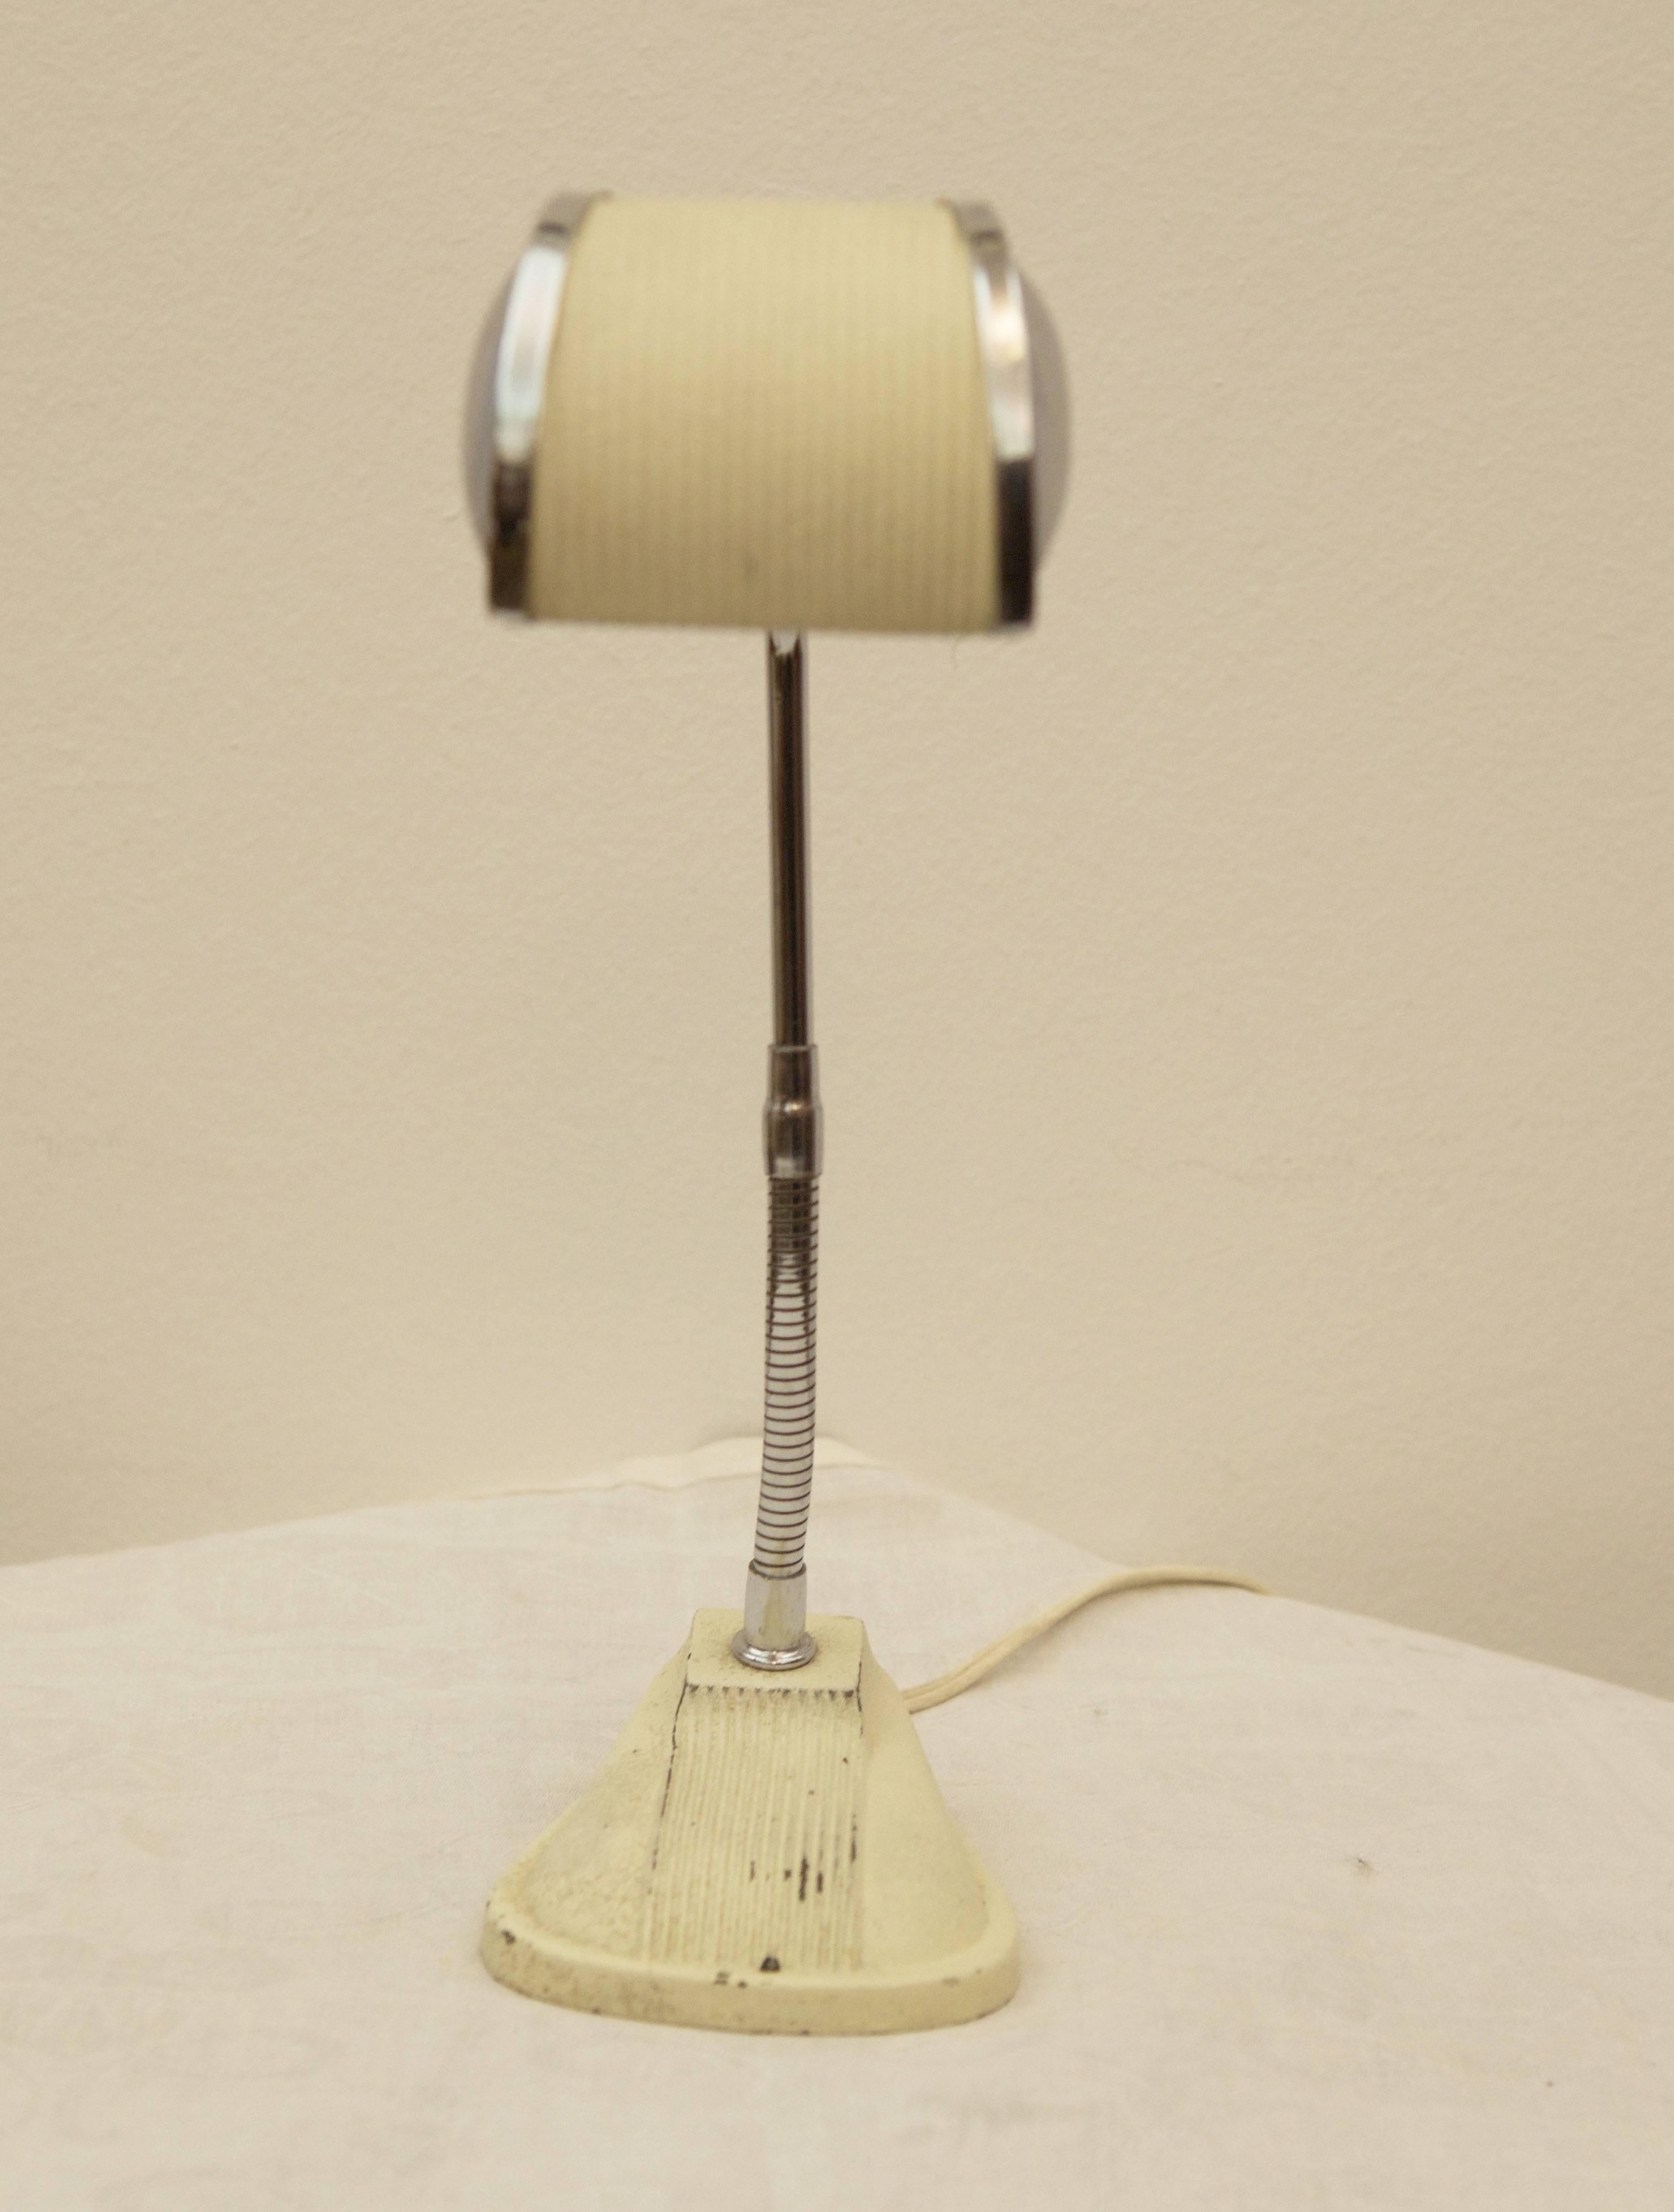 Unusual Jumo Table Lamp In Excellent Condition For Sale In Vienna, AT